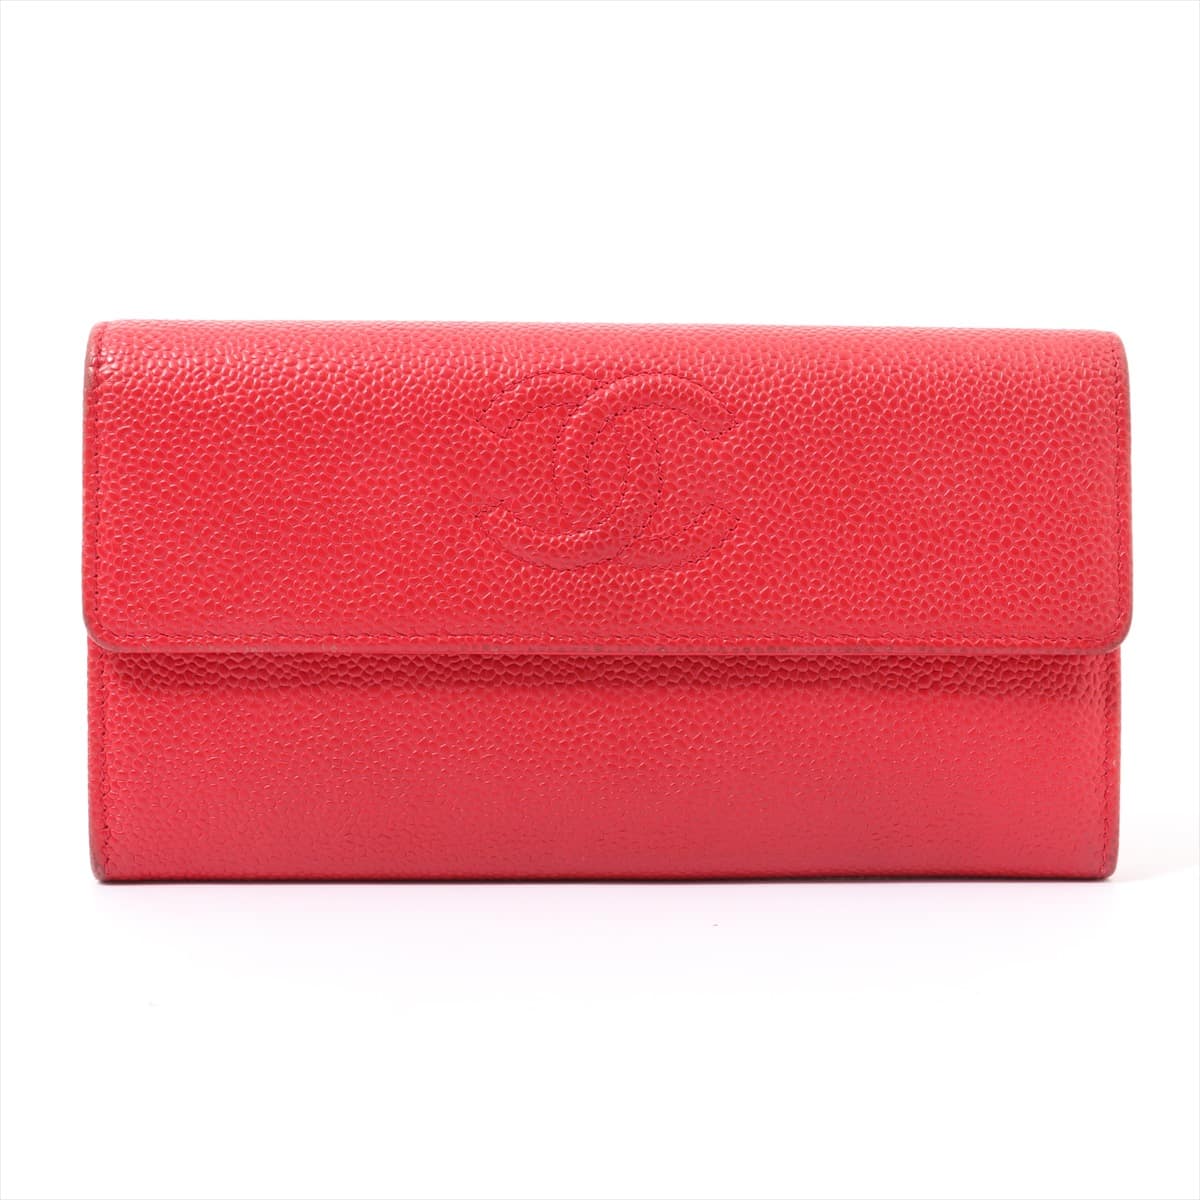 Chanel Coco Mark Caviarskin Wallet Red Silver Metal fittings 22XXXXXX